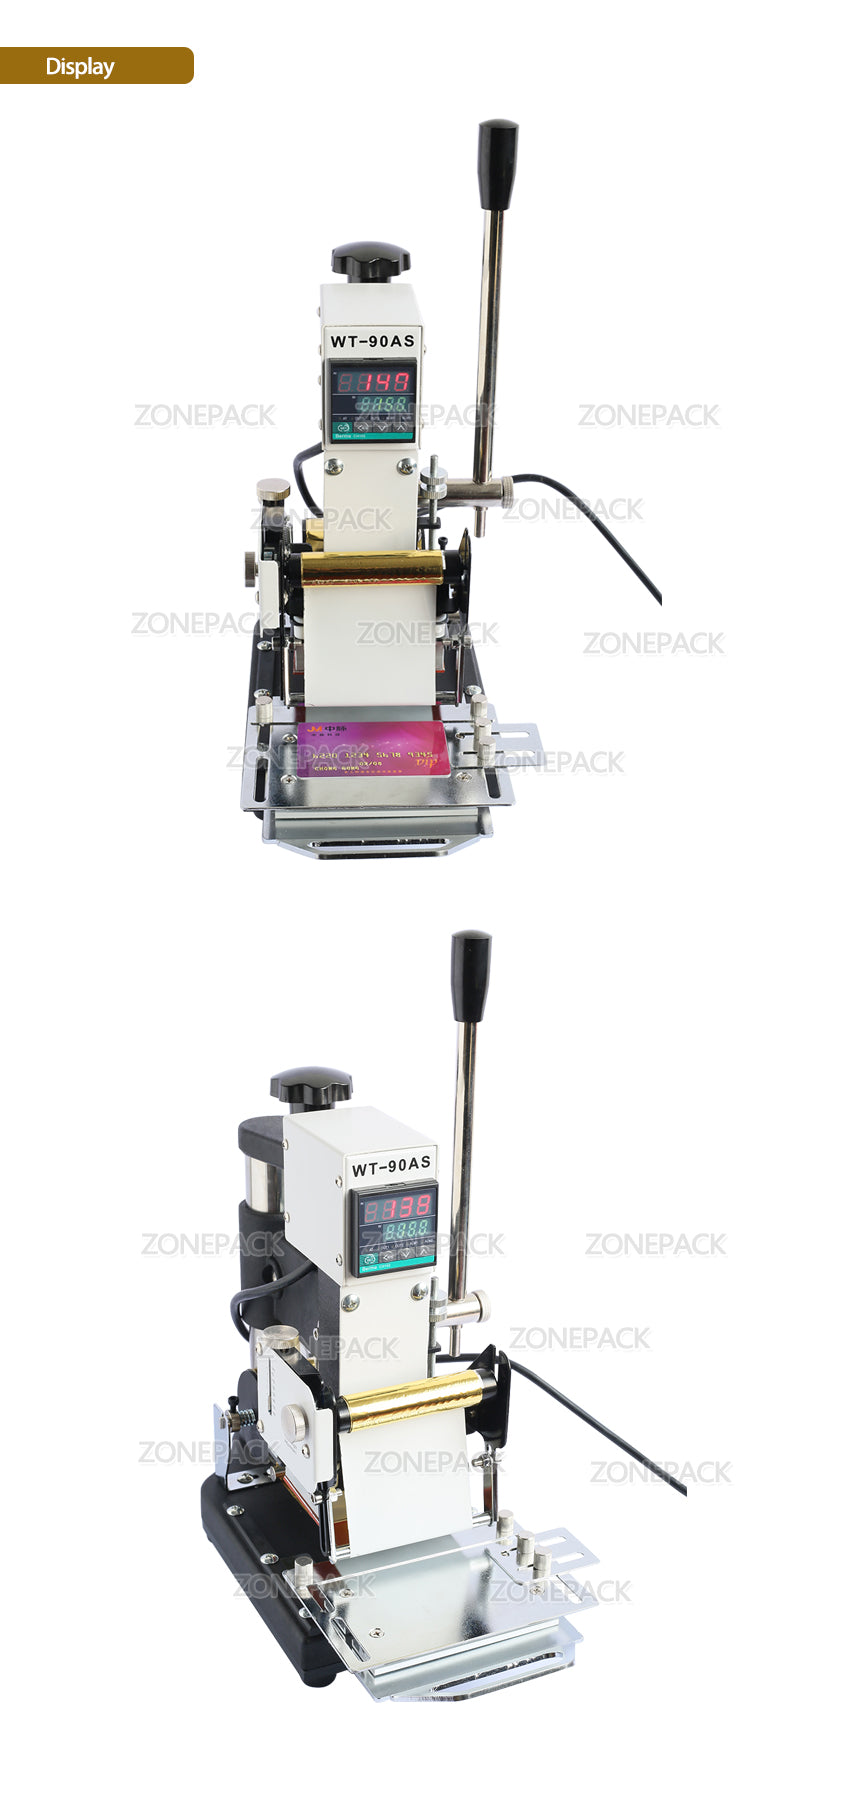 ZONEPACK WT-90AS Best Quality 220V/110V Manual Hot Foil Stamping Machine Card Tipper Embossing Machine For ID PVC Cards